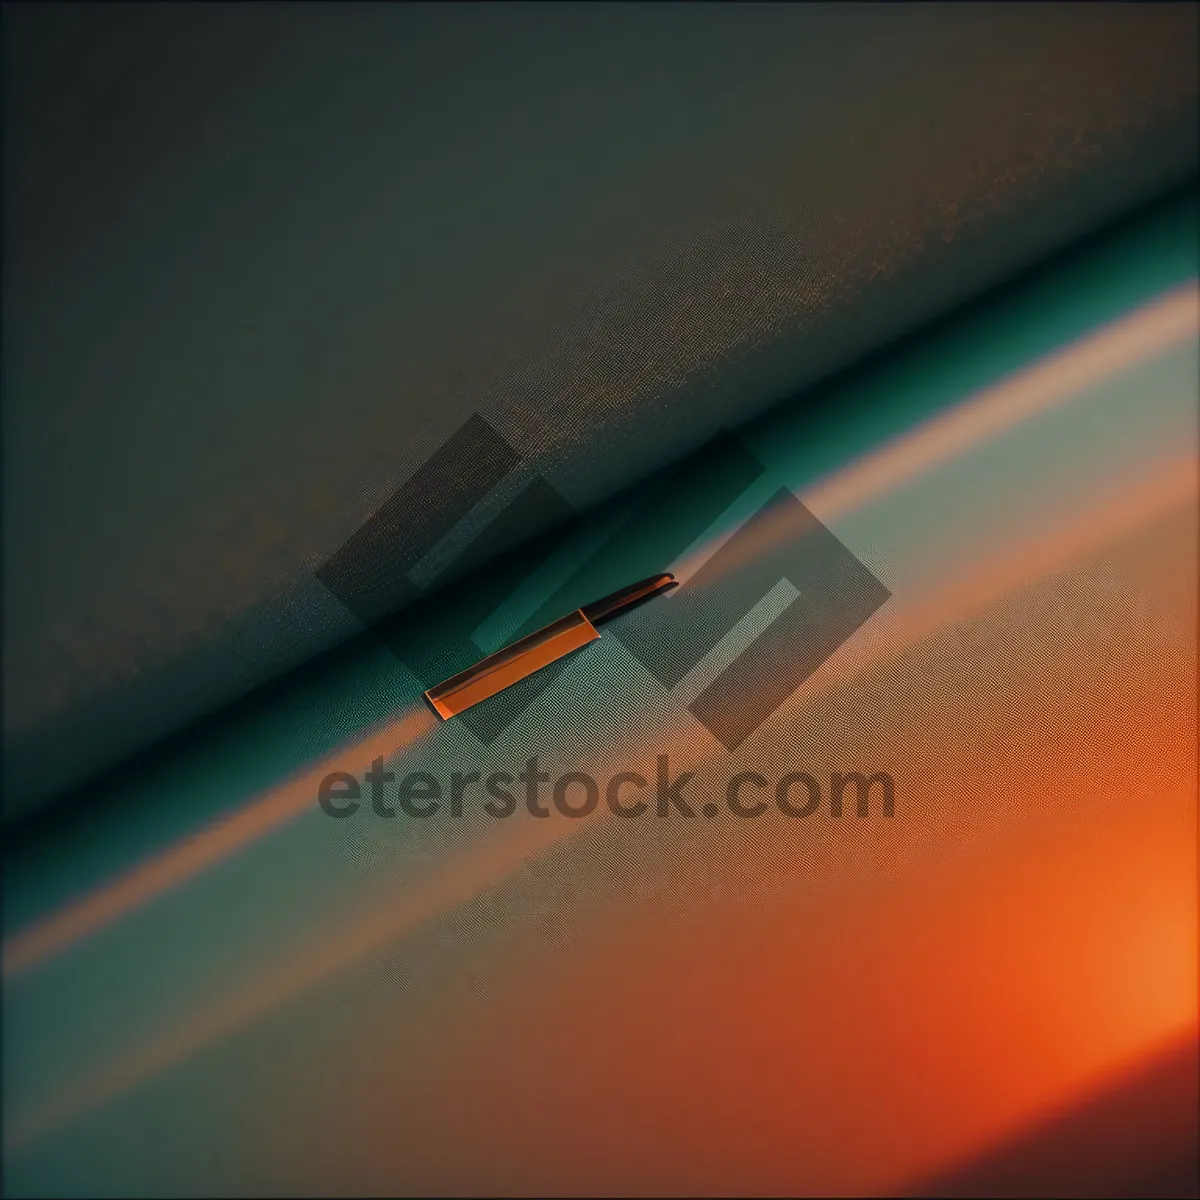 Picture of Blurred Colorful Graphic Lines: A Futuristic Optical Device